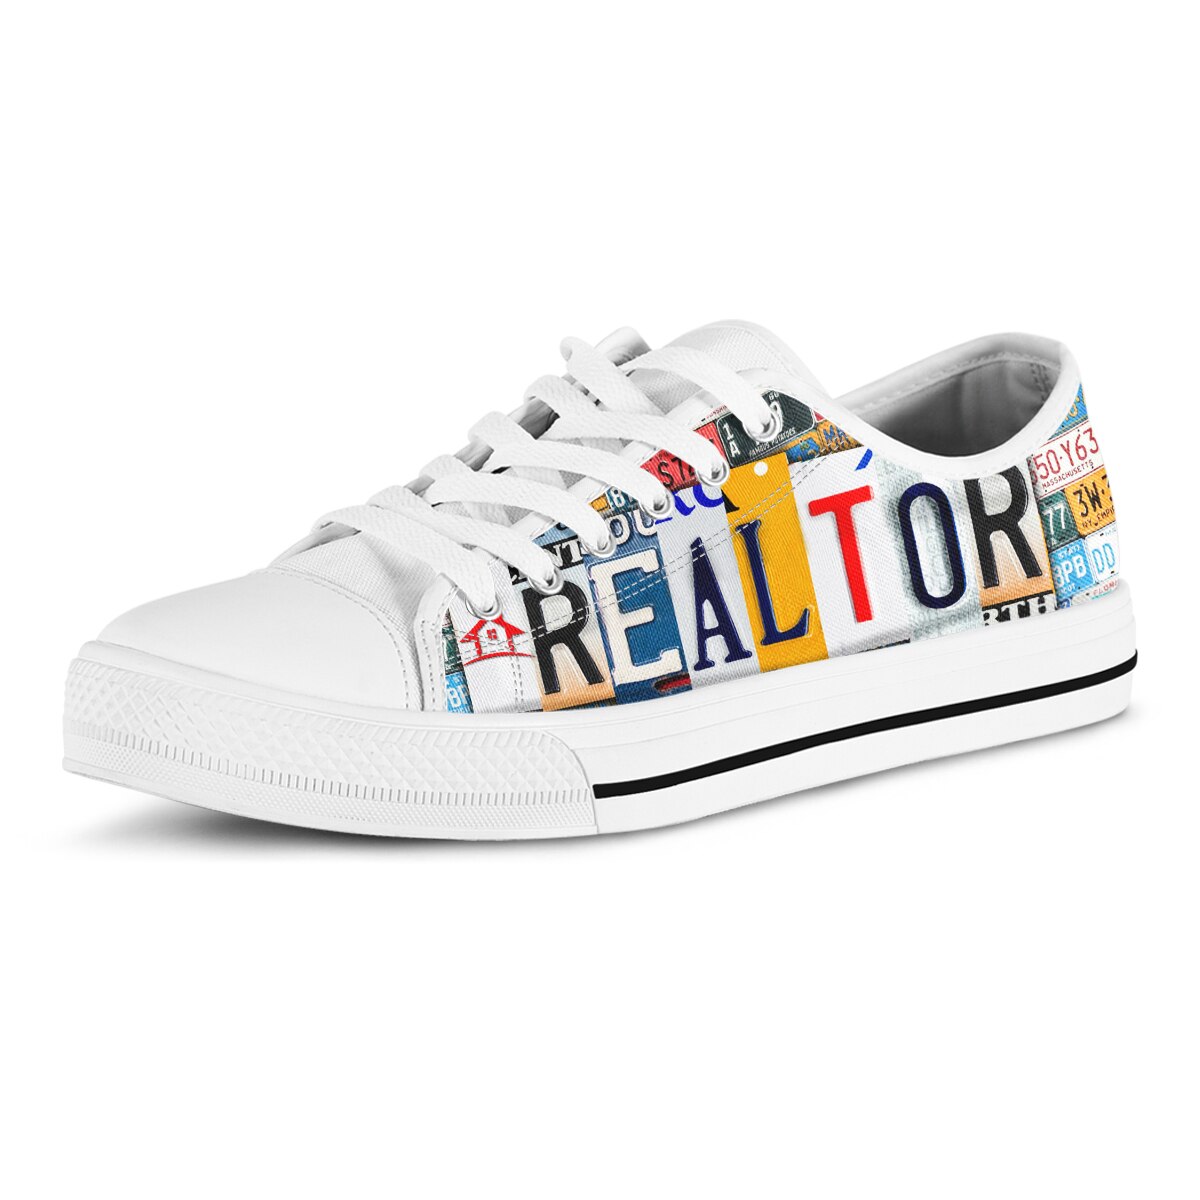 BKQU License Plate Realtor Design Ladies Shoes Casual Flats Shoes for Women Low Top Canvas Shoes for Women Brand